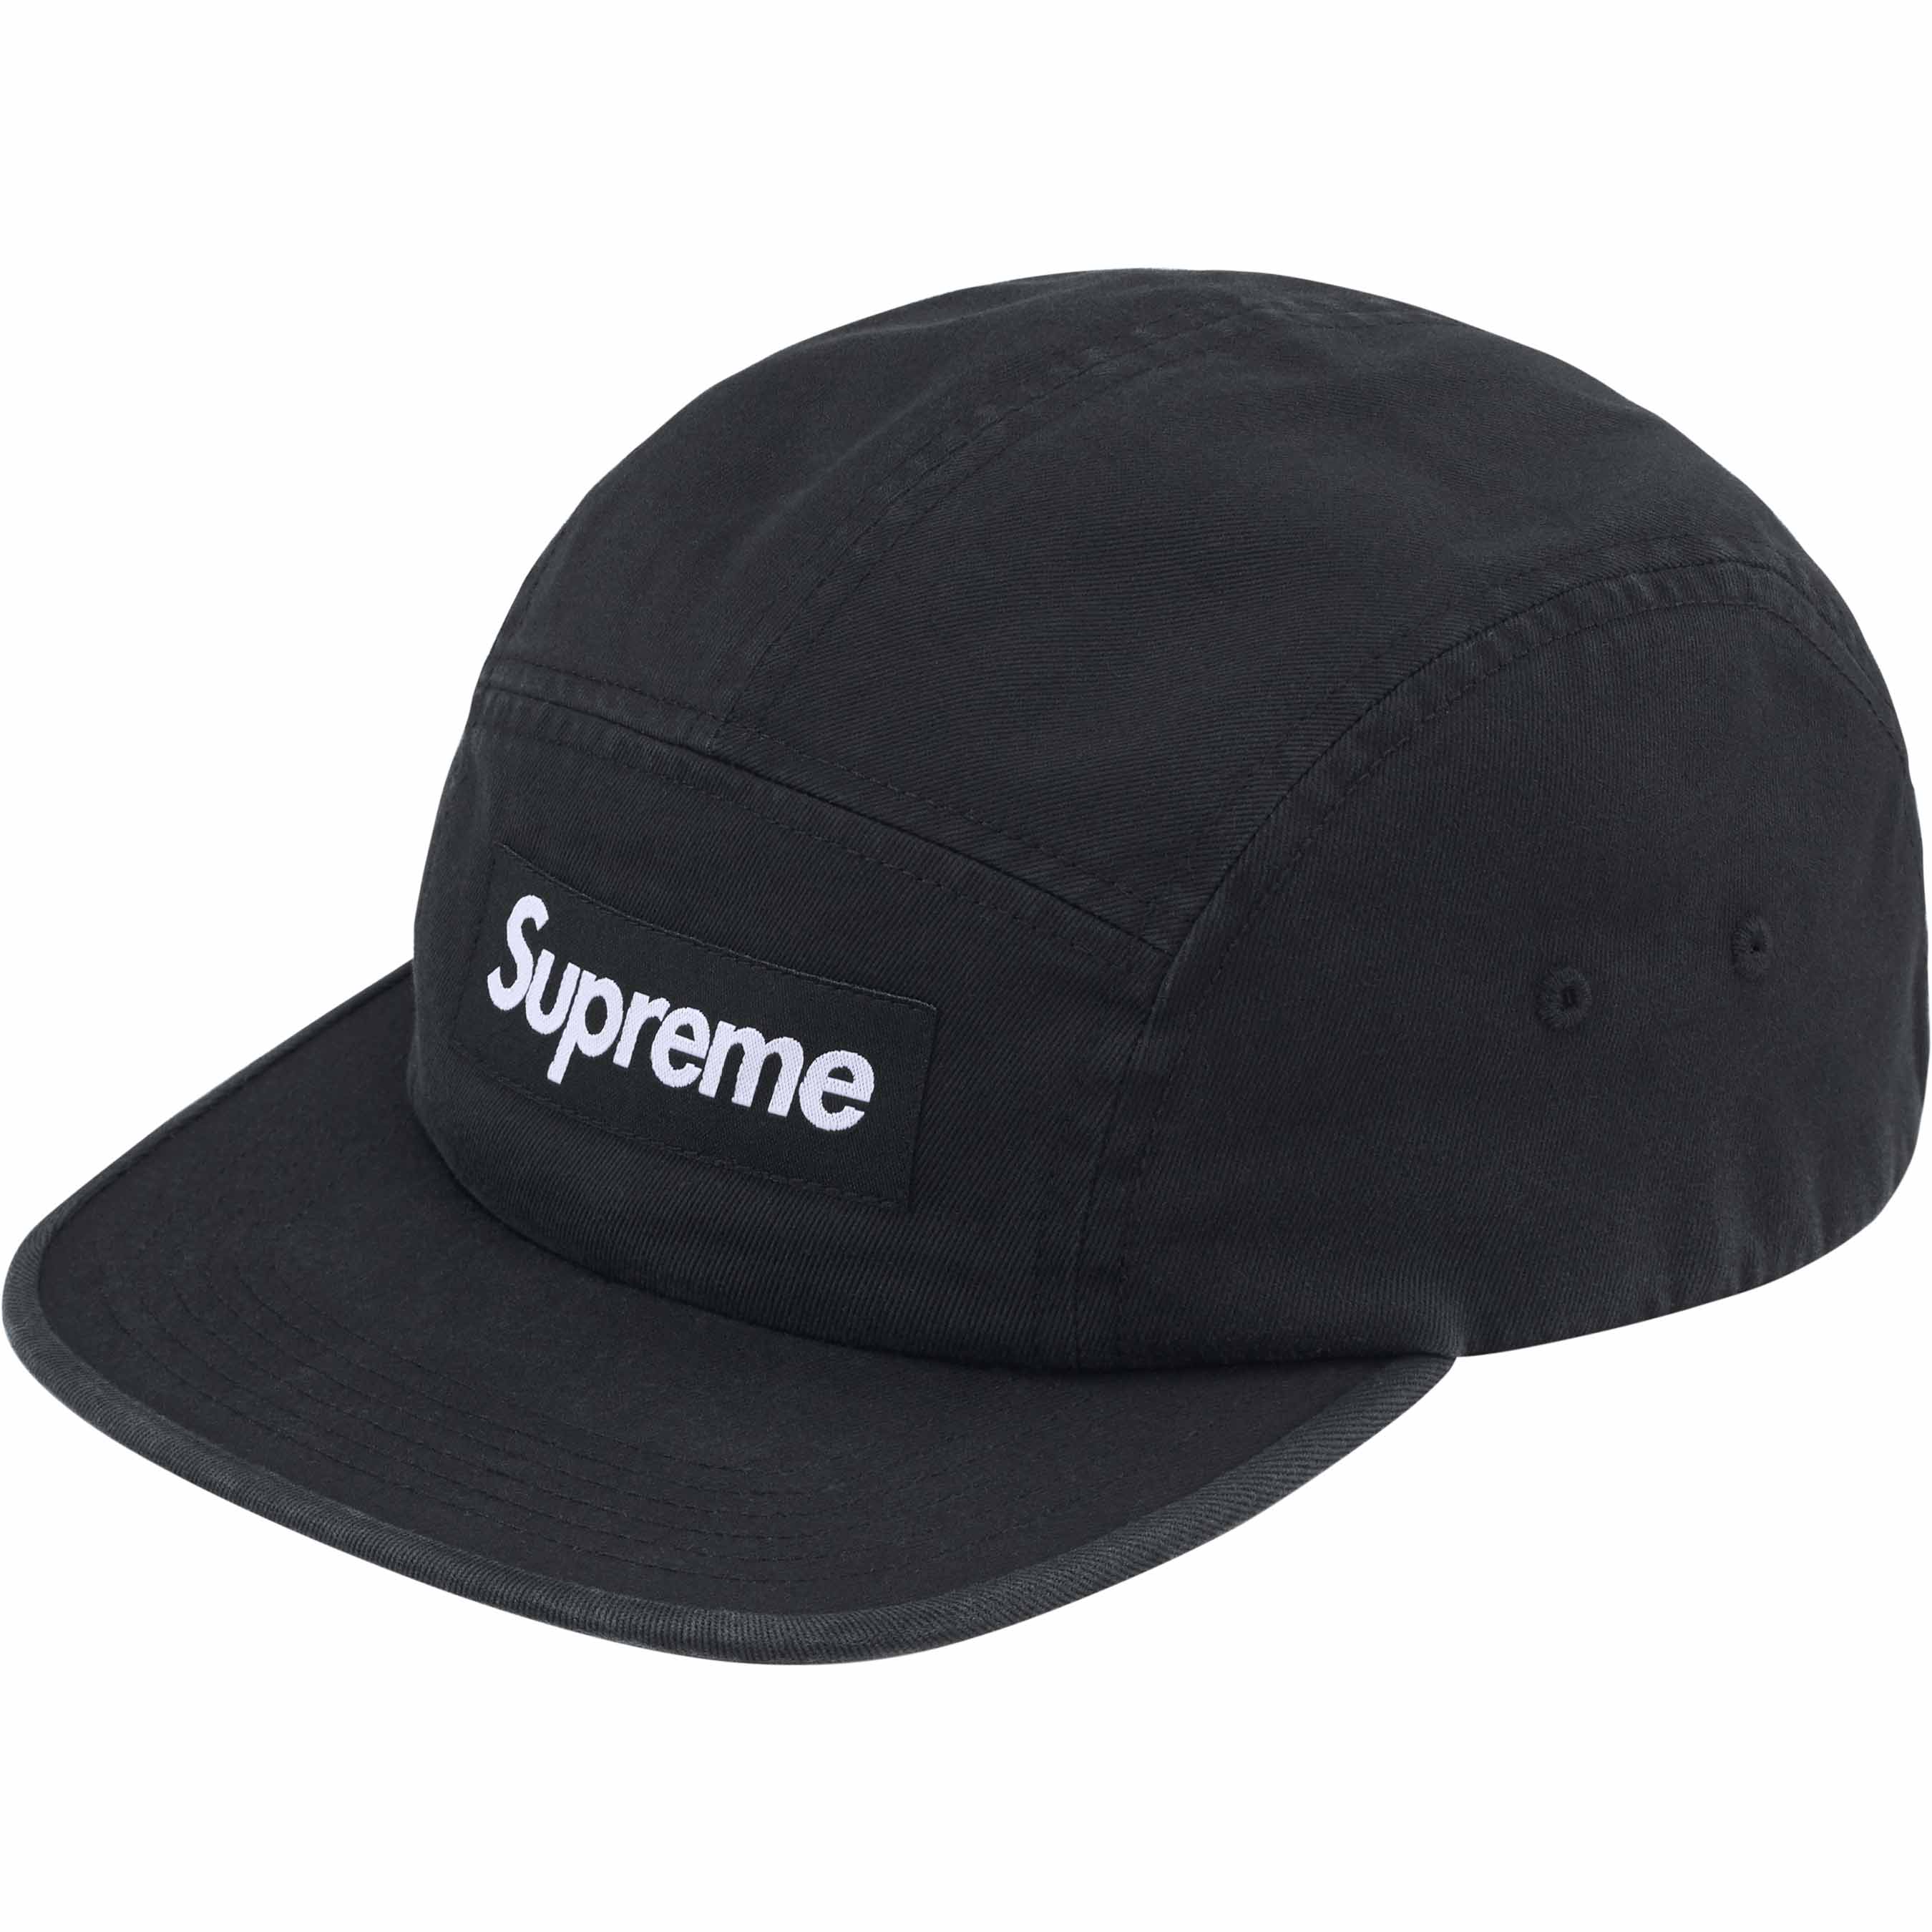 Supreme Washed Chino Twill Camp Cap (SS18) Floral